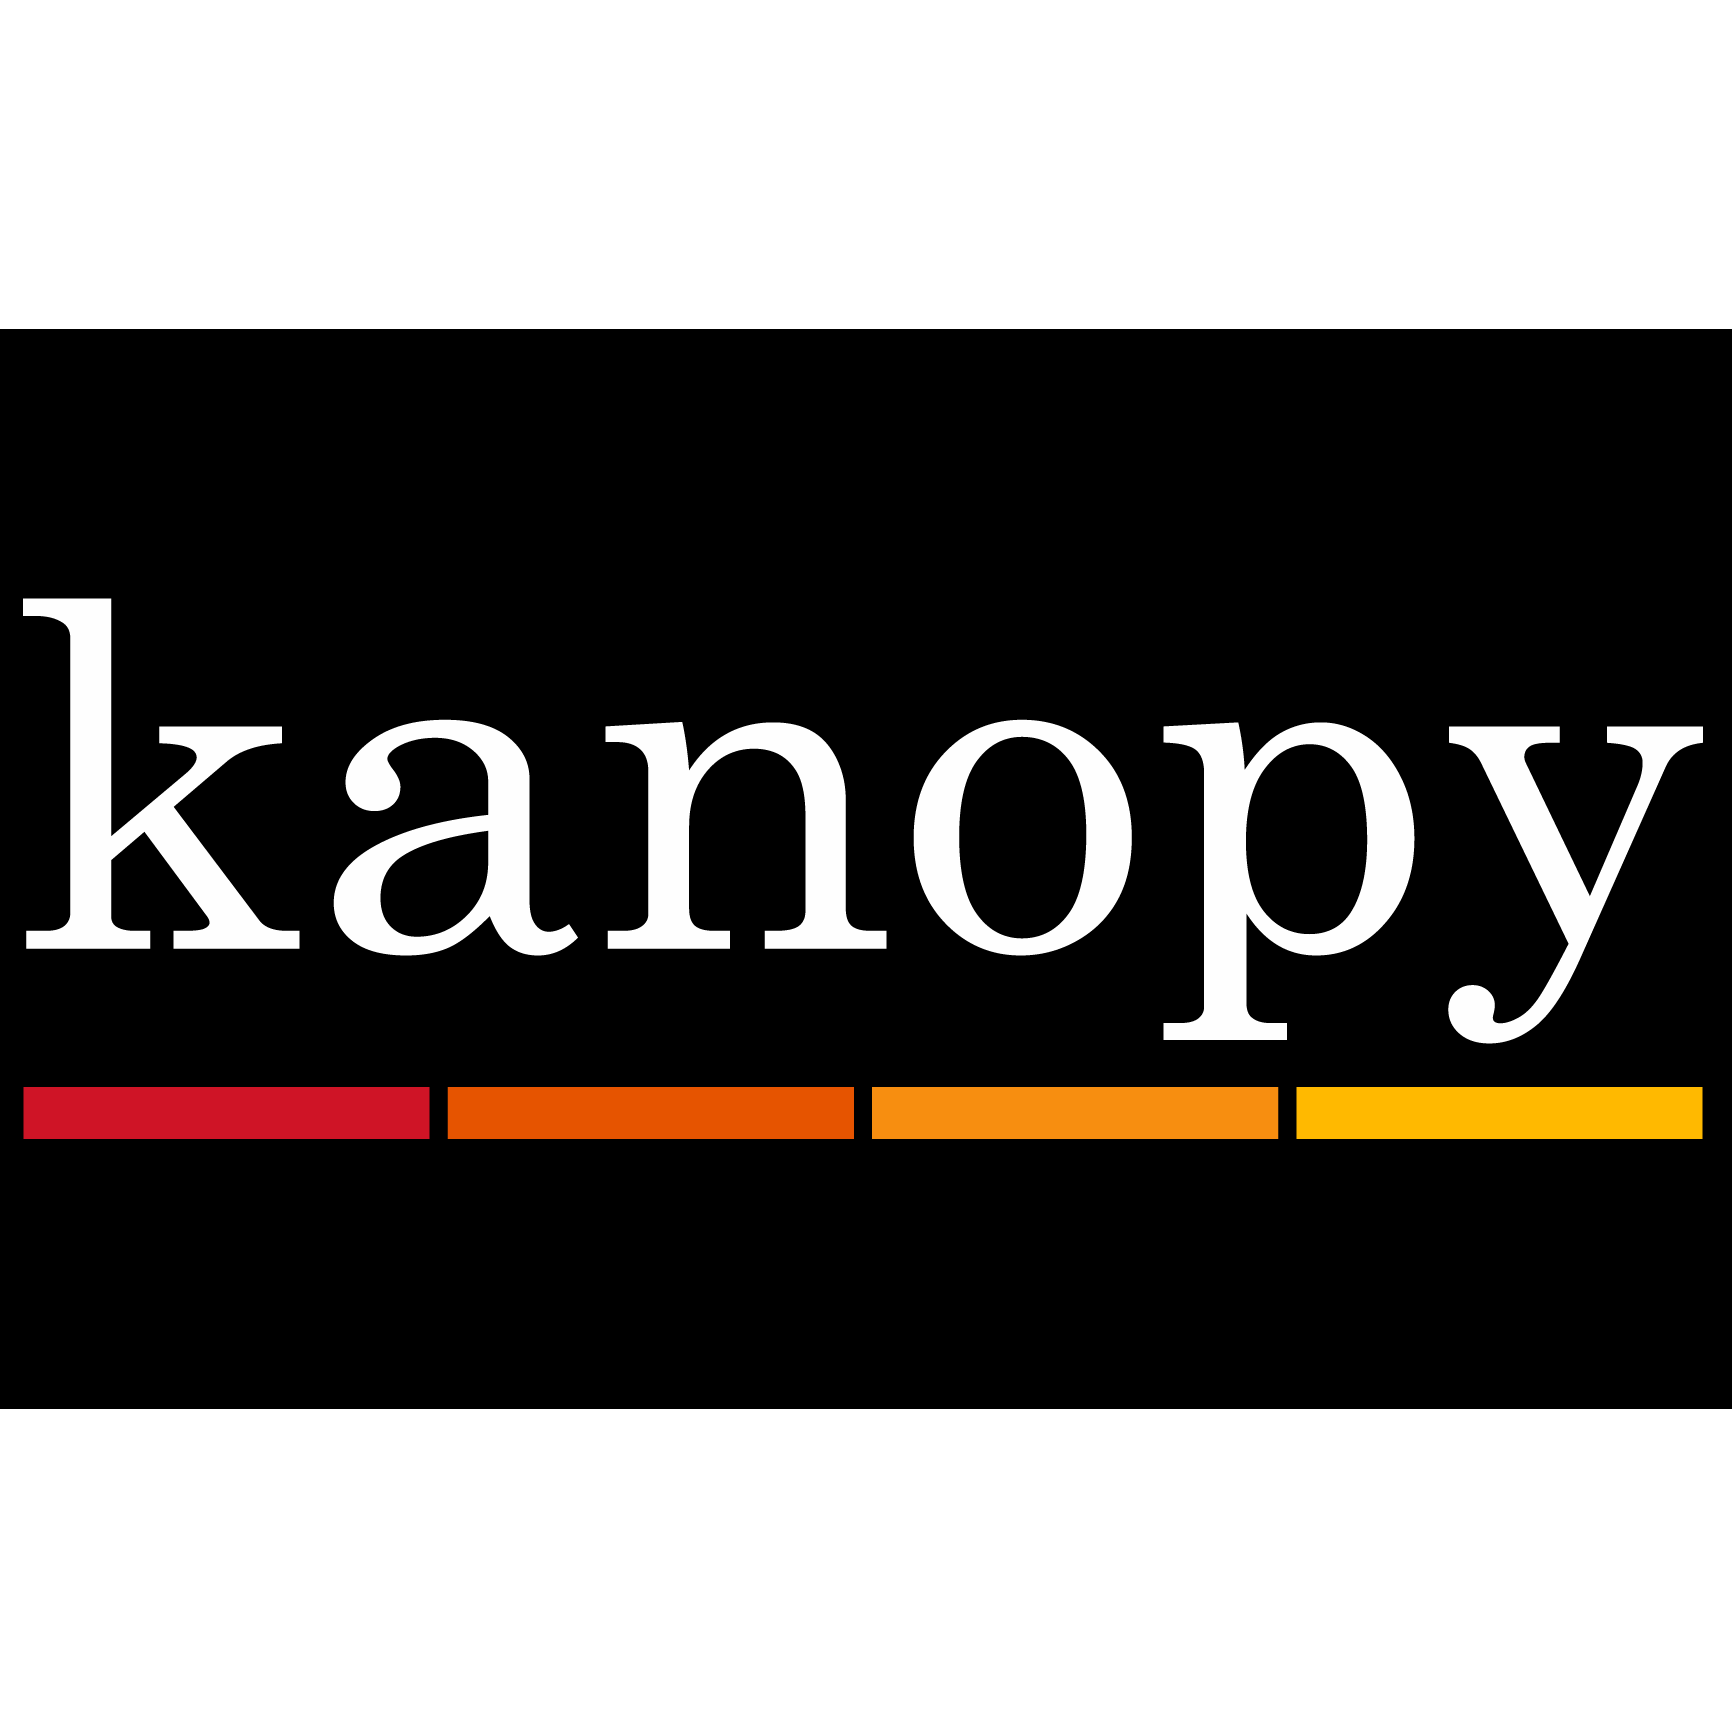 The kanopy wordmark, written in white over a blackdrop above a segmented line fading from red to orange.